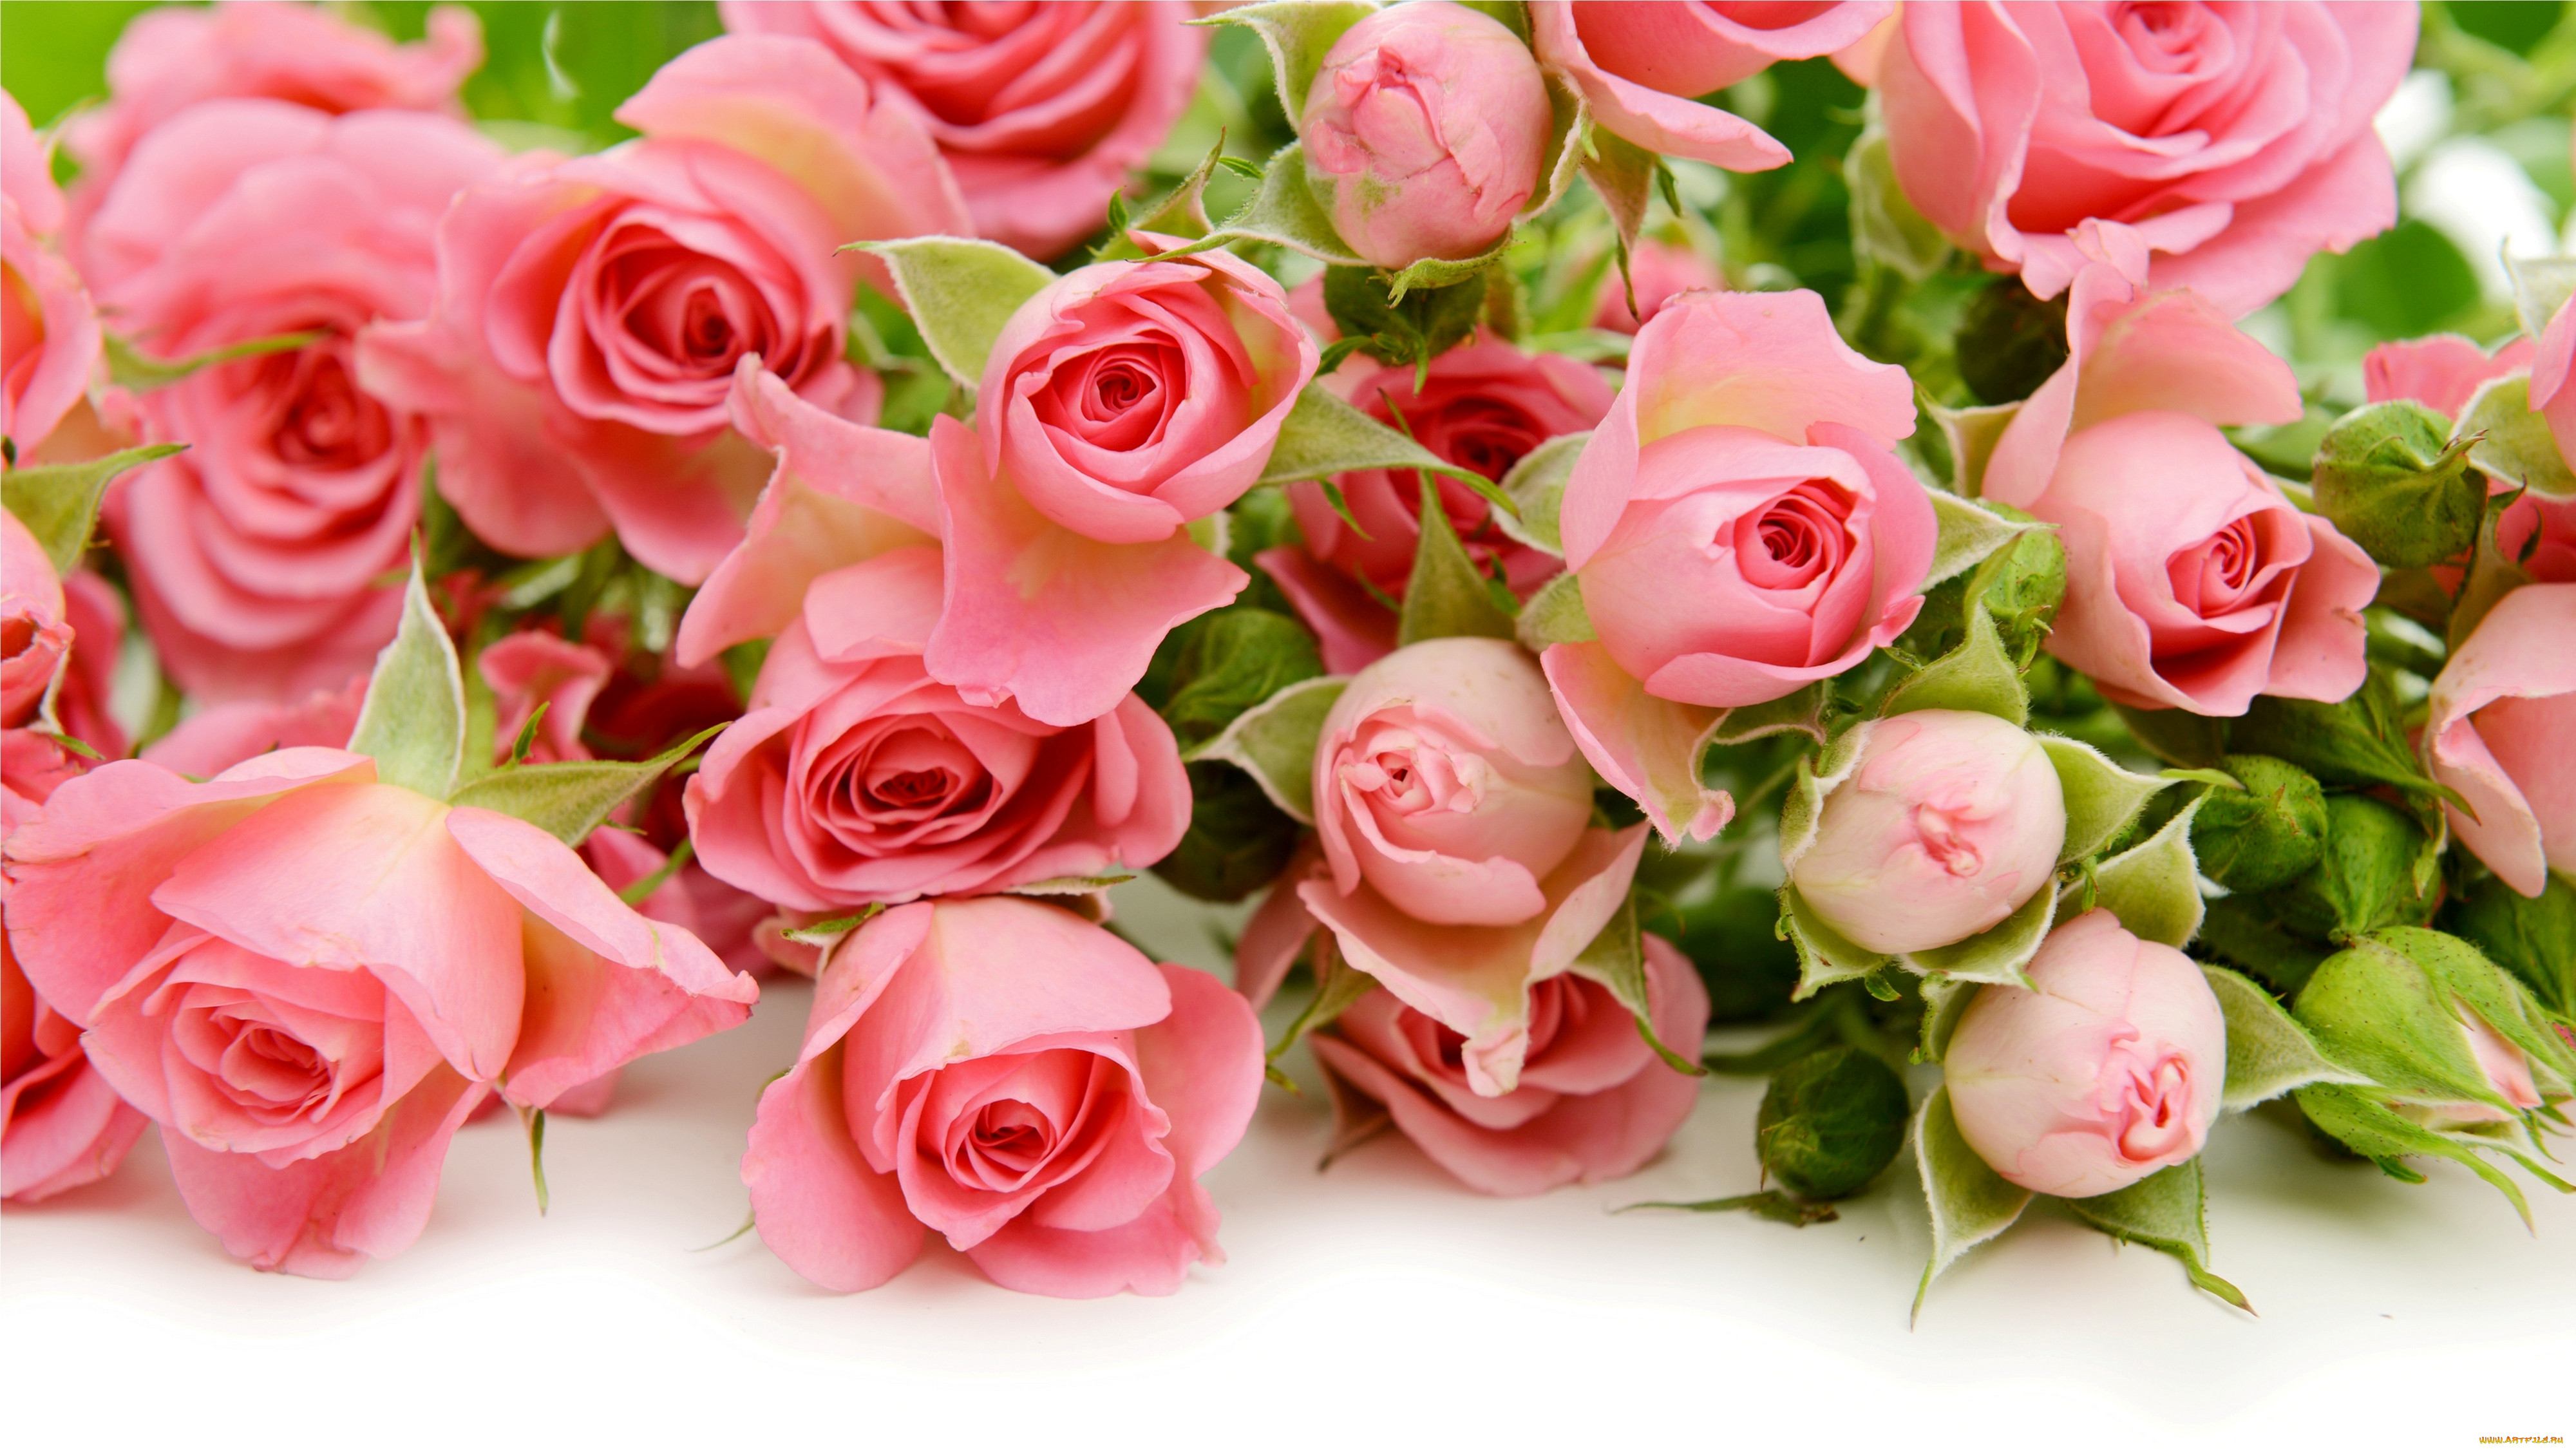 , , flowers, roses, pink